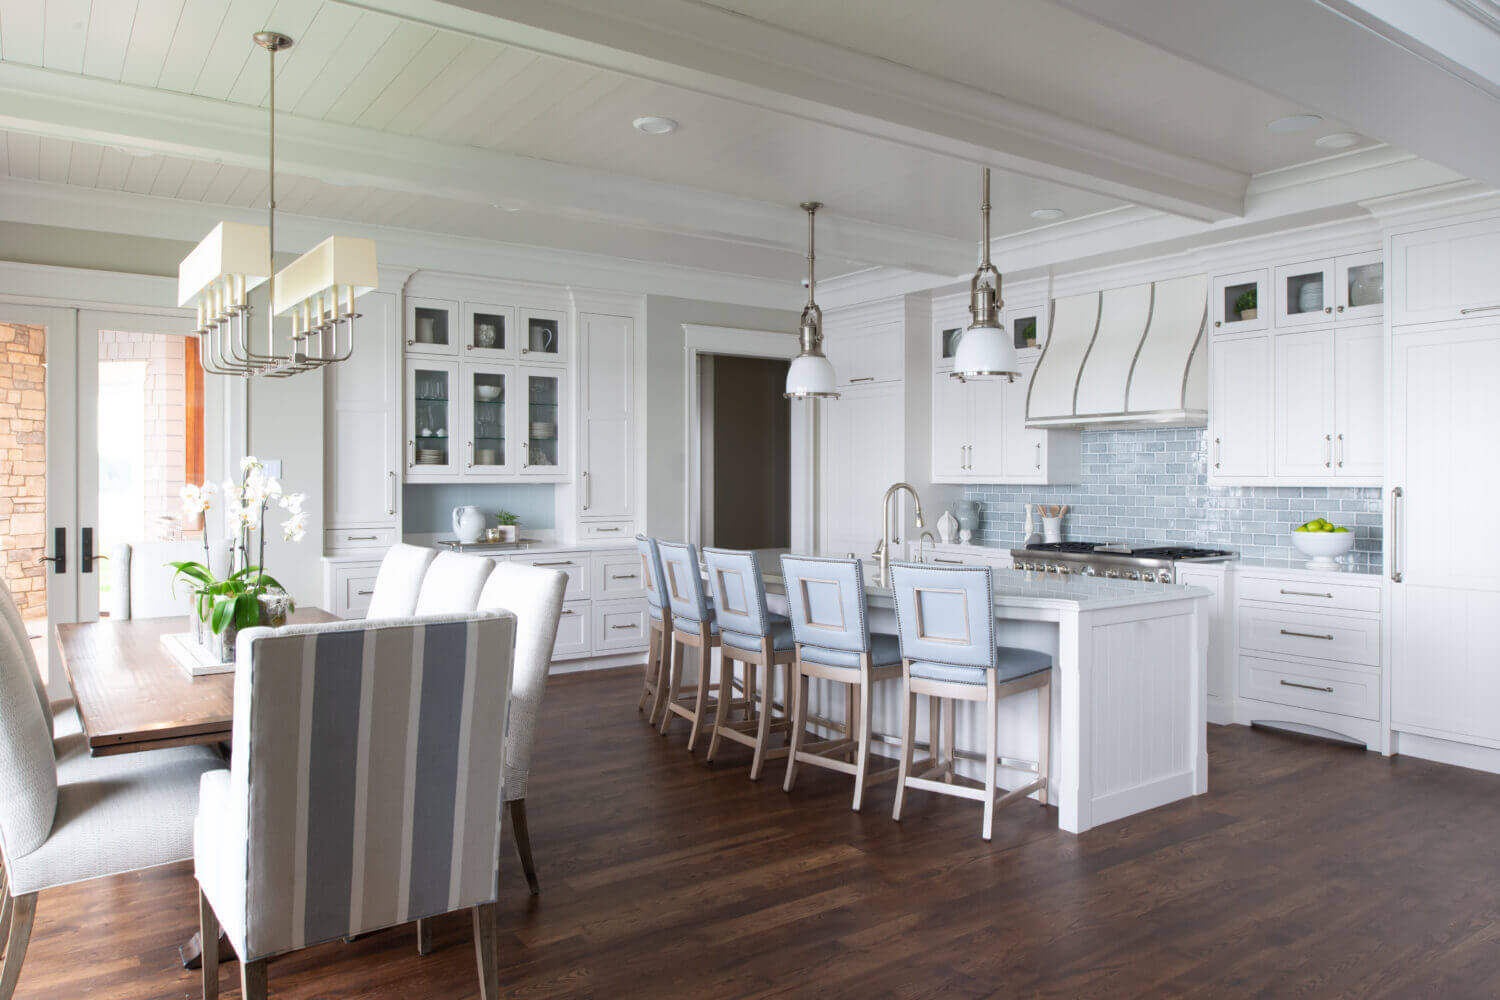 An all-white kitchen design with custom inset cabinets and shiplap and light blue accents.